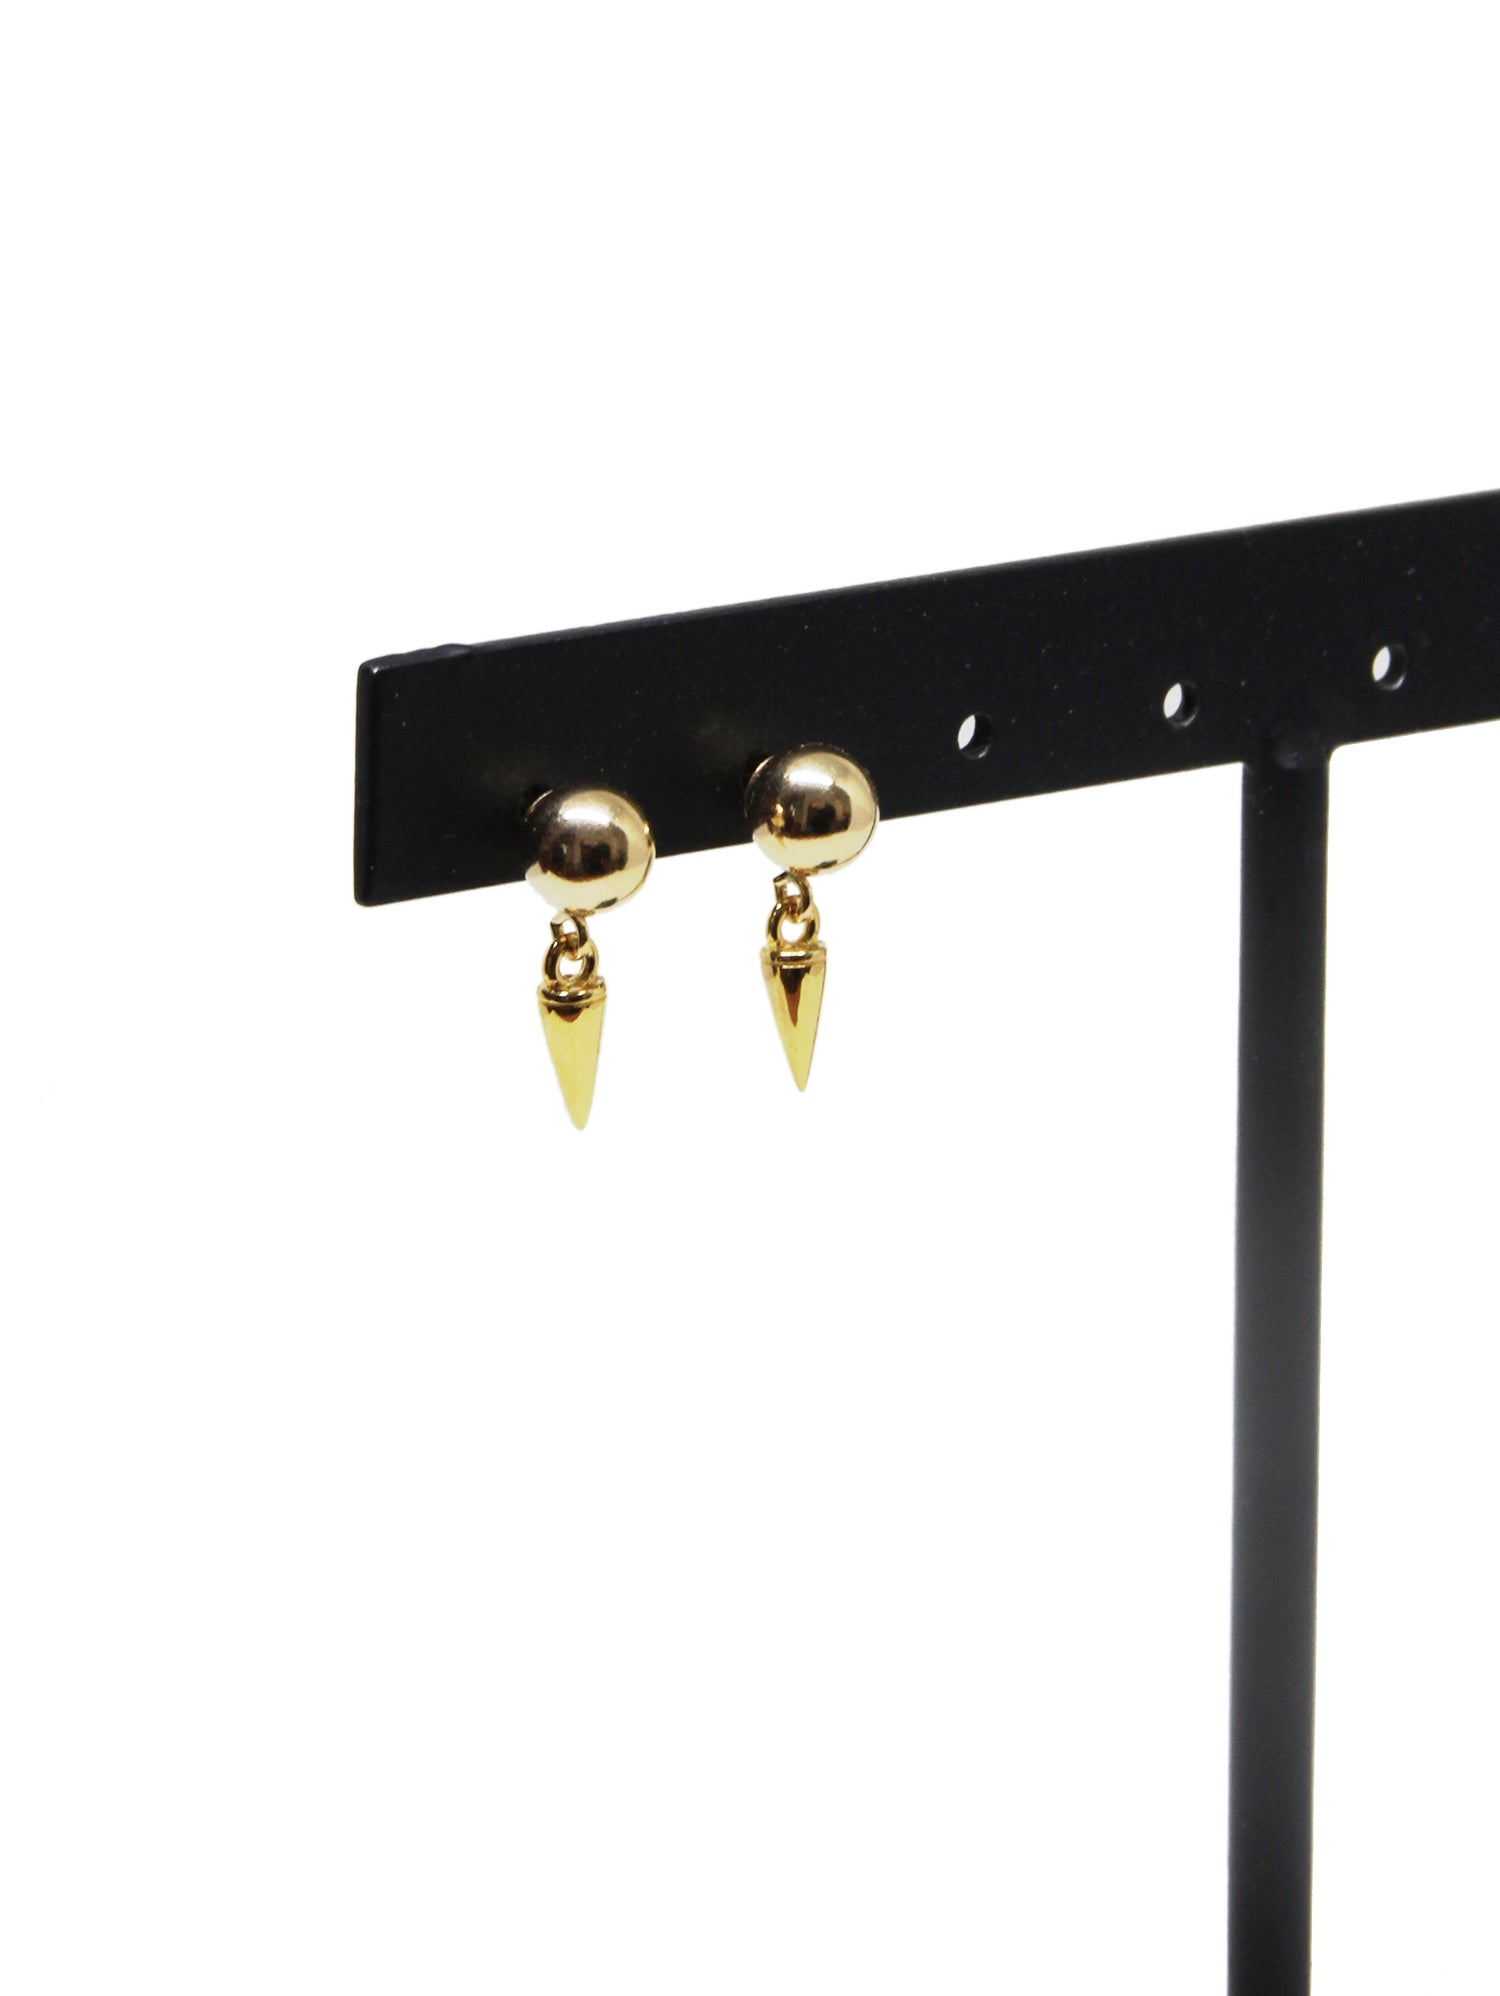 llayers jewelry small spikes ball gold hoops earrings- boucles d'oreilles petits clous sphères en or